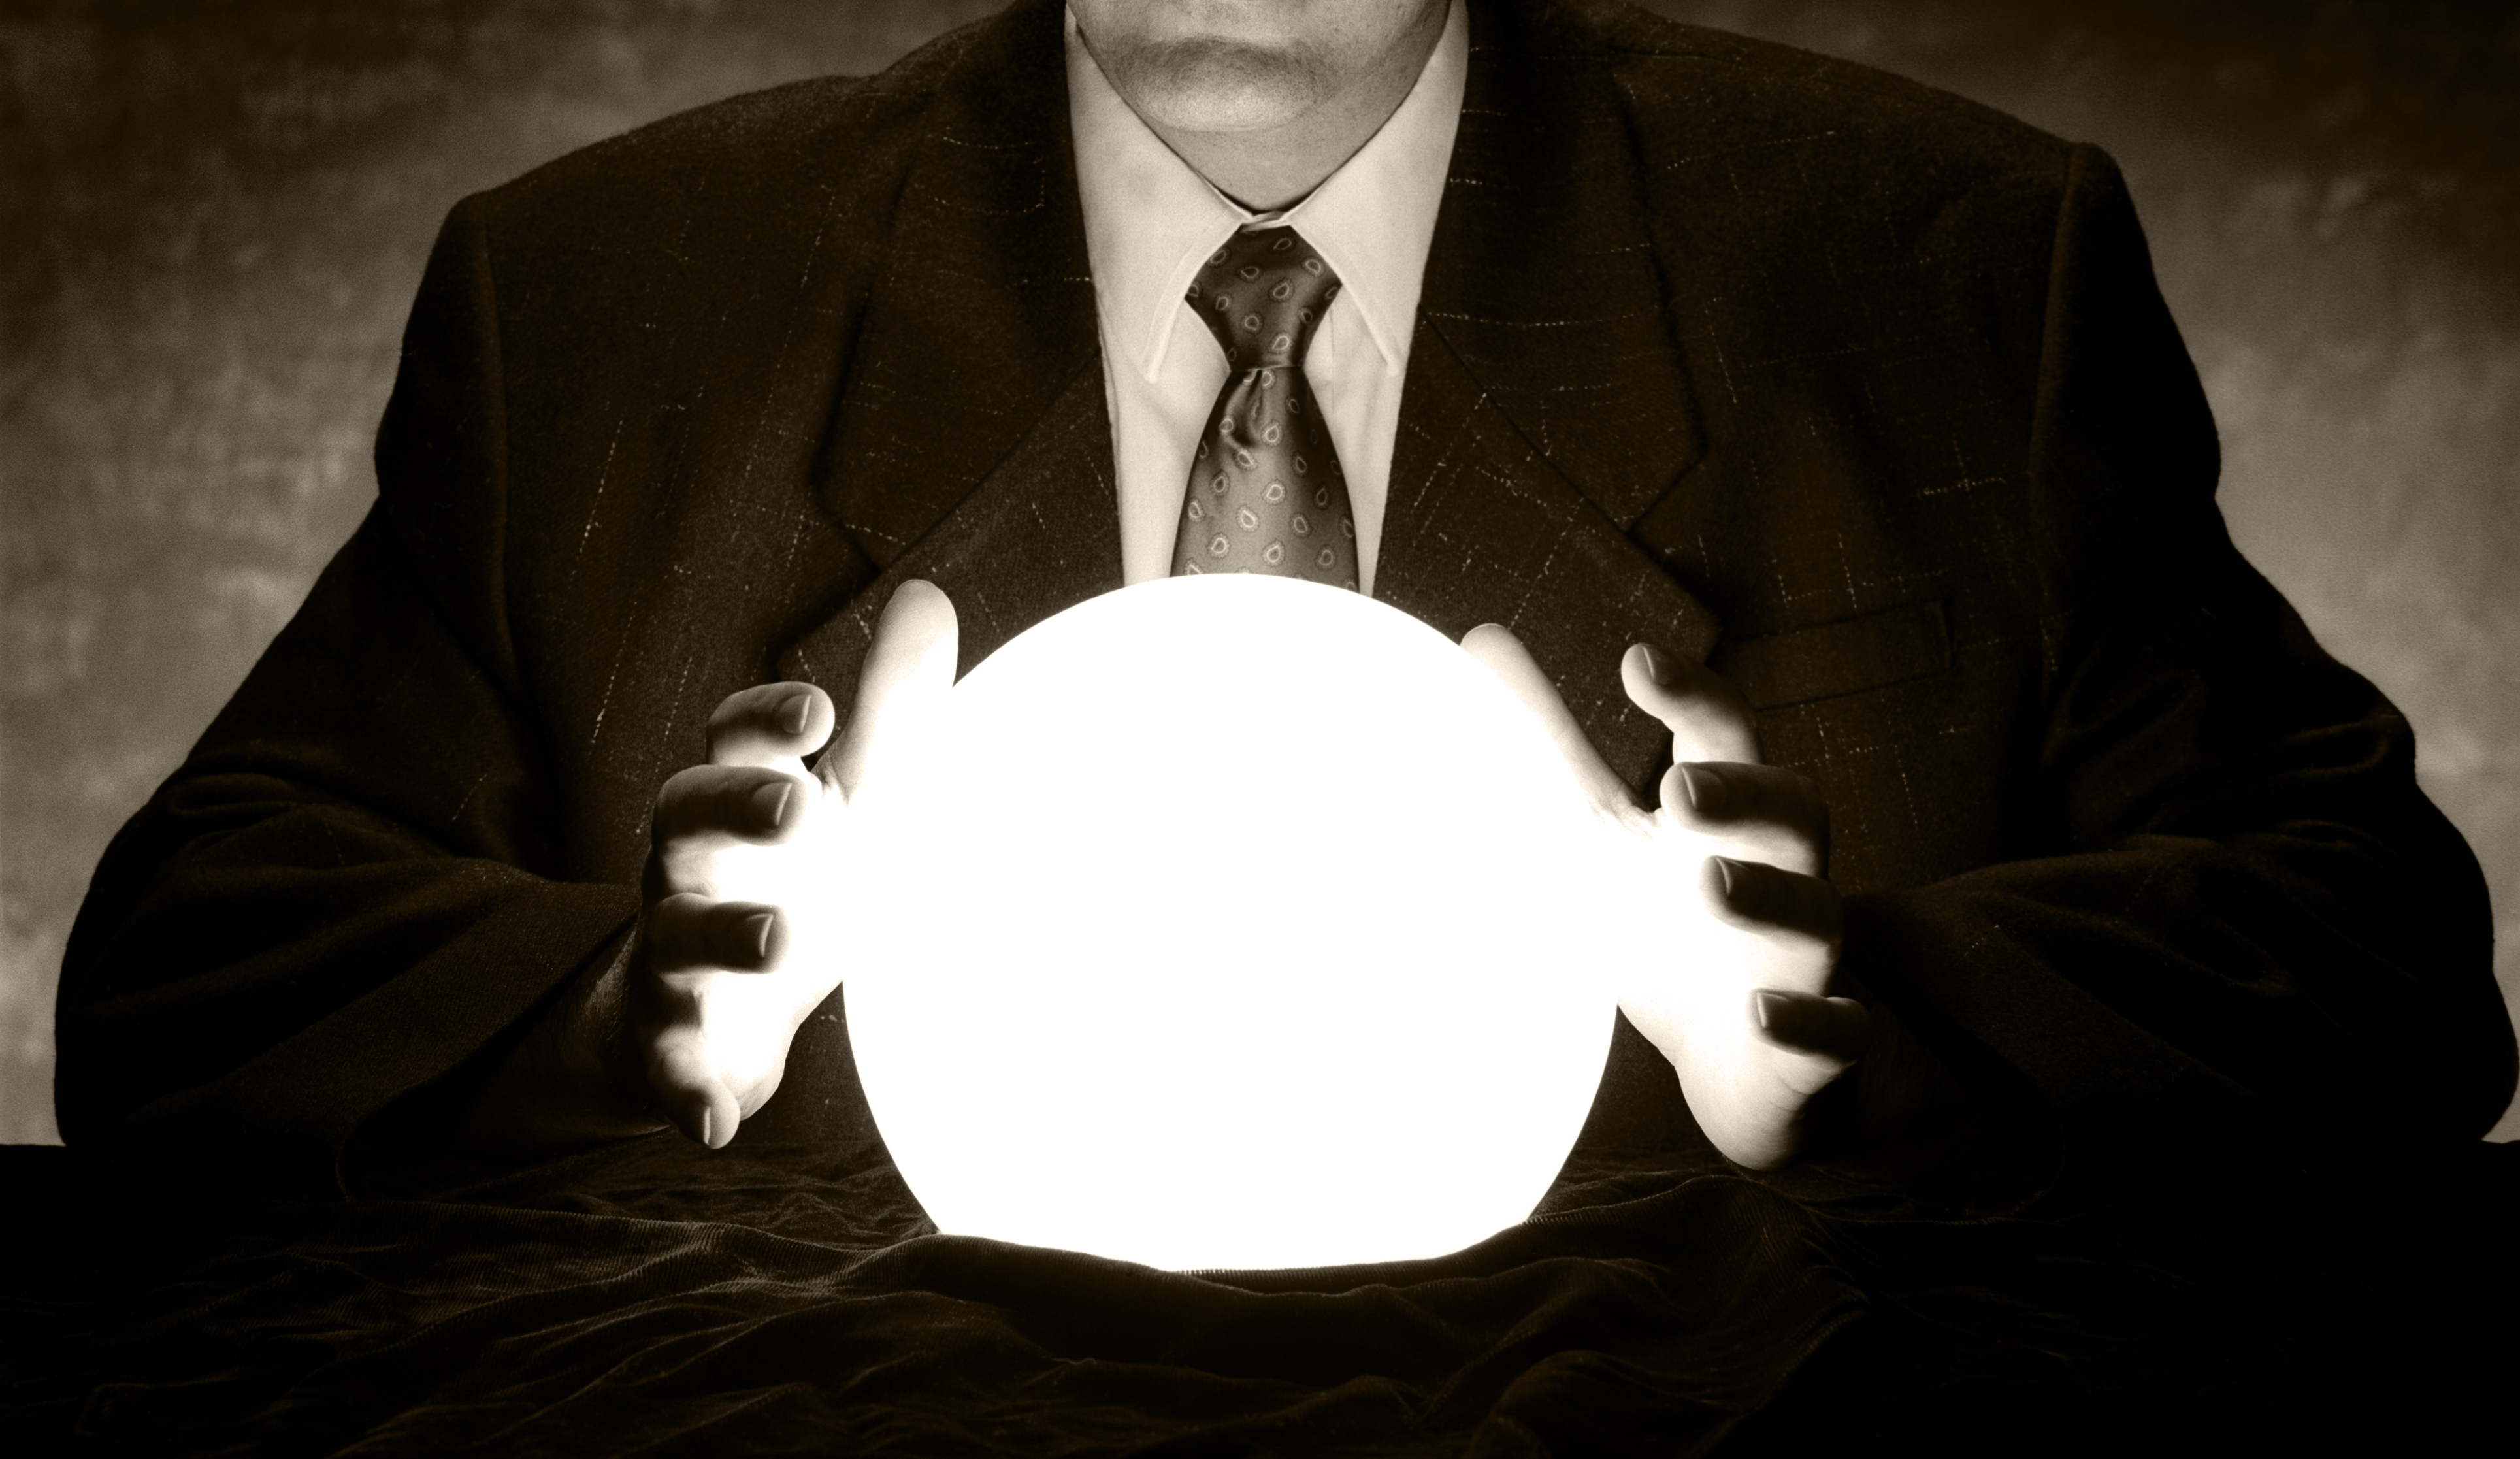 A businessman is consulting a crystal ball to foretell the future.